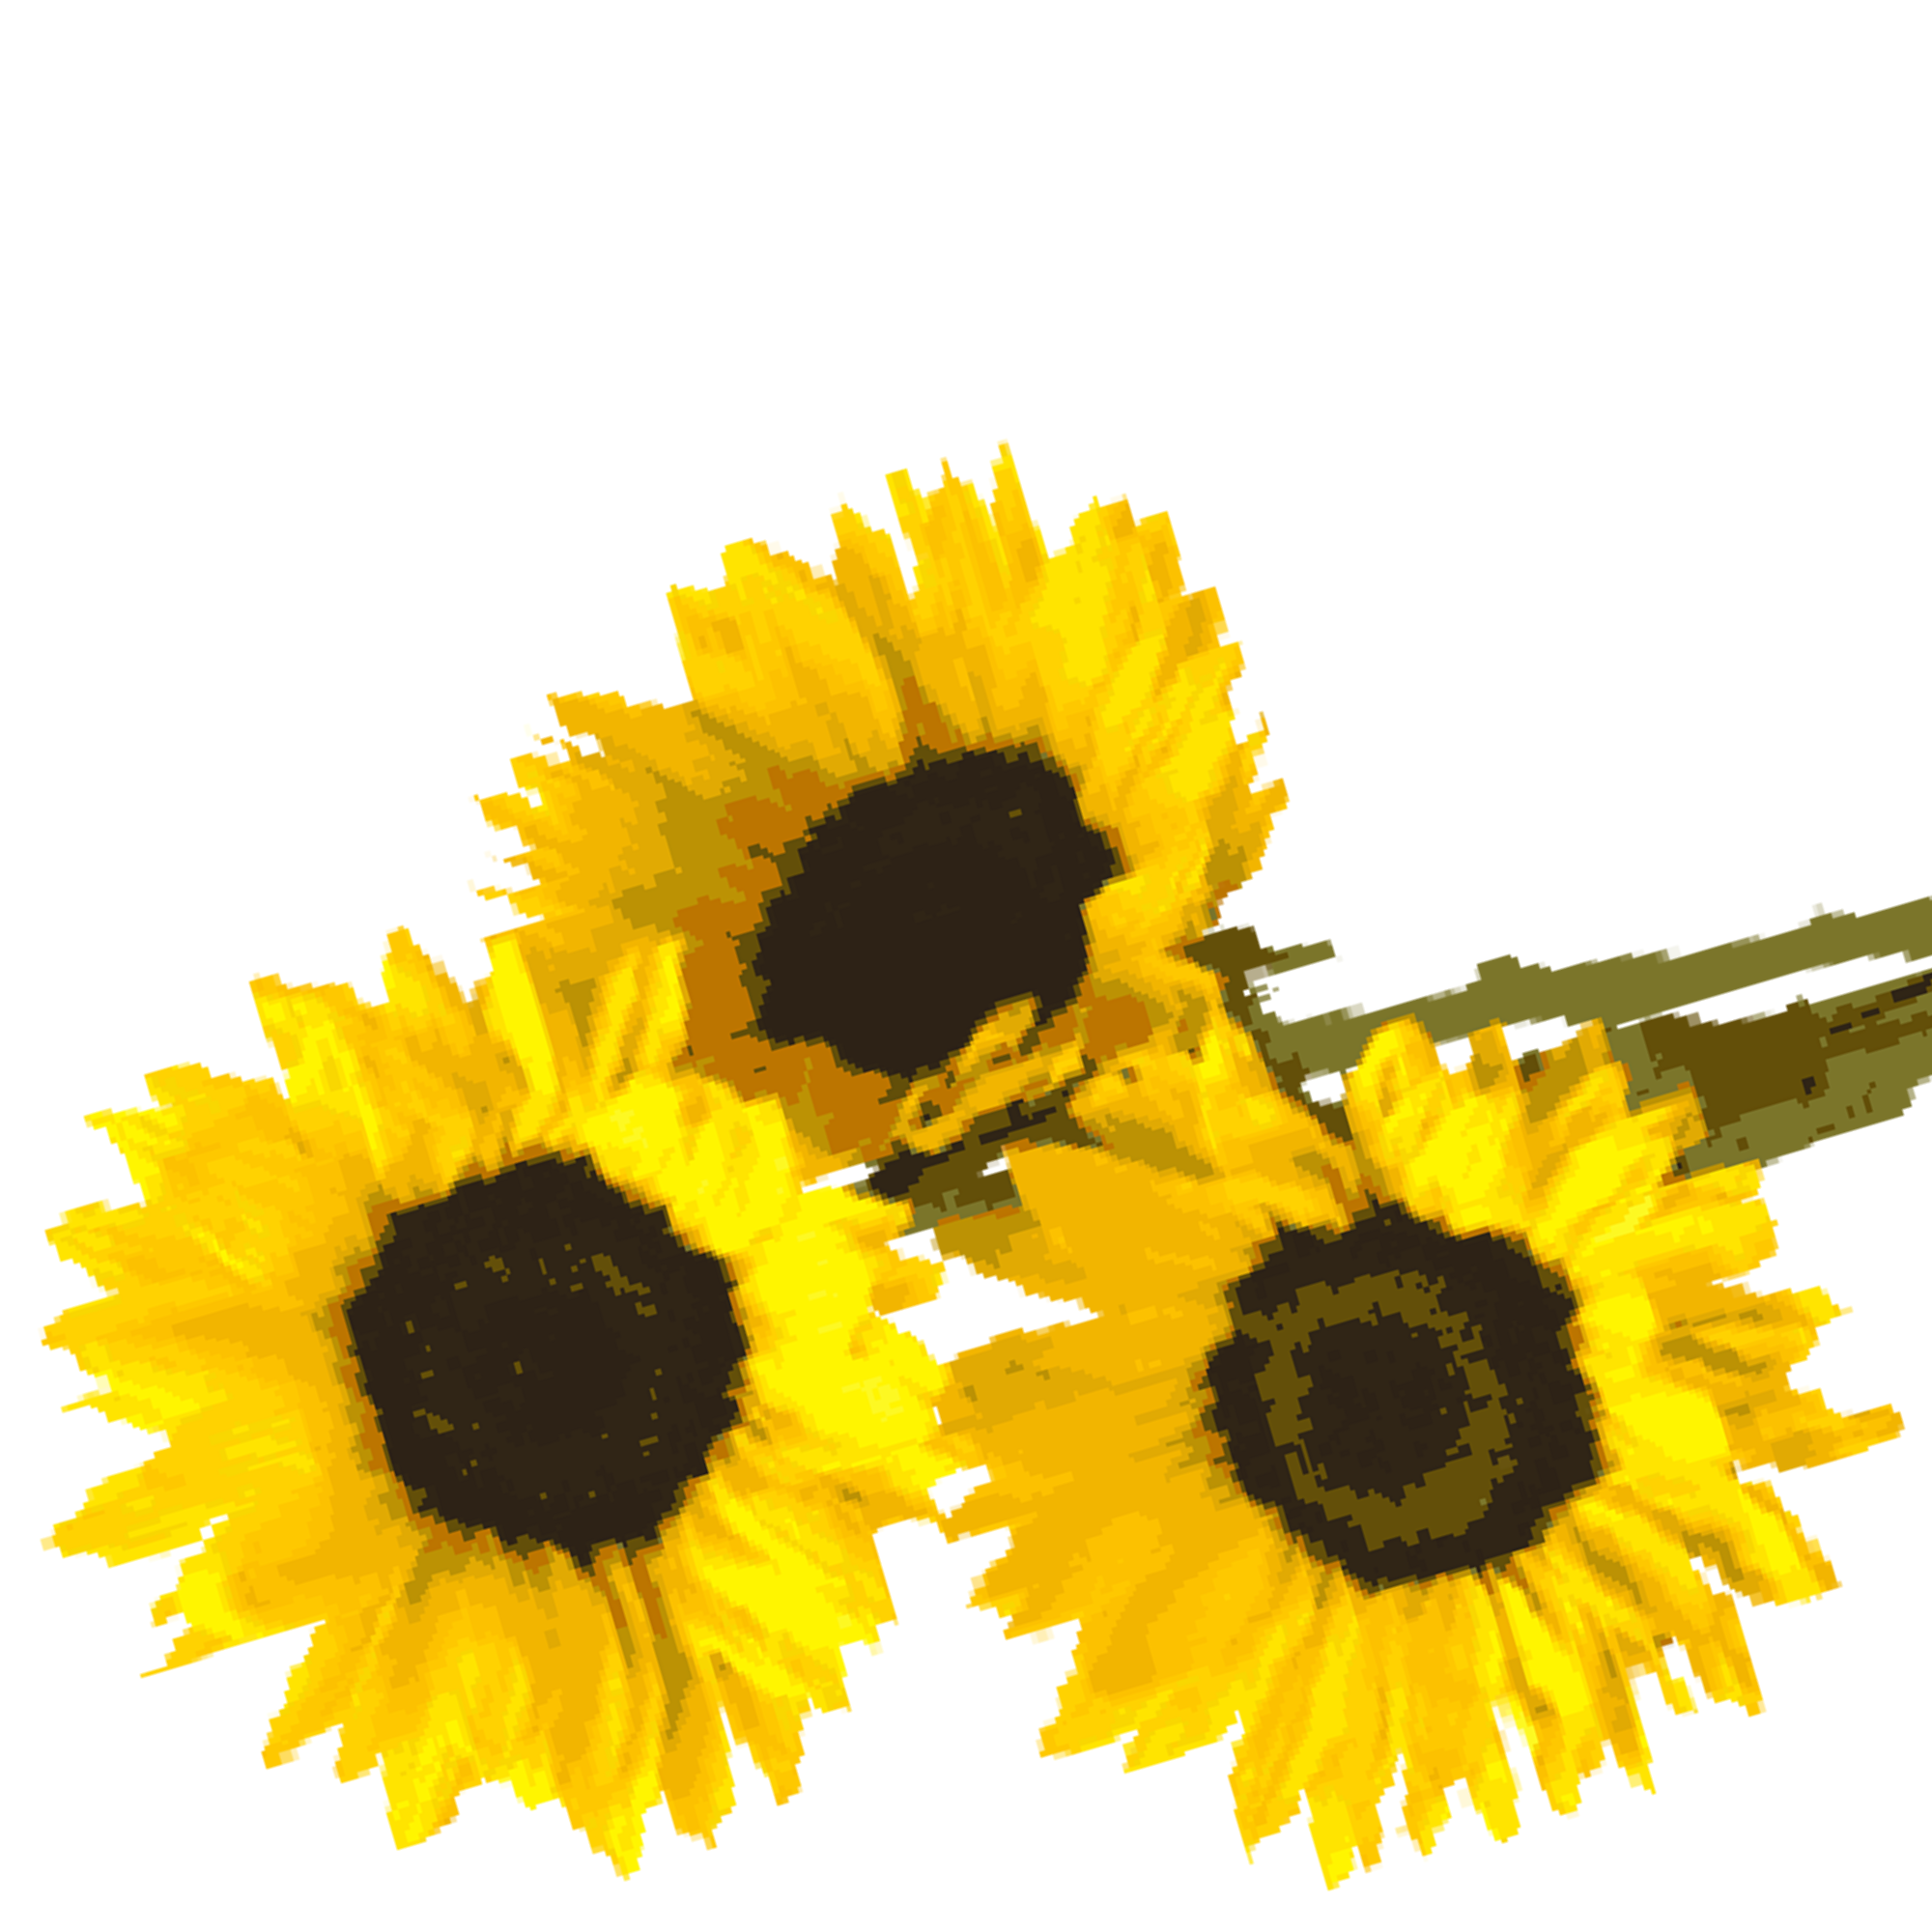 Sunflowers and Their Many Benefits